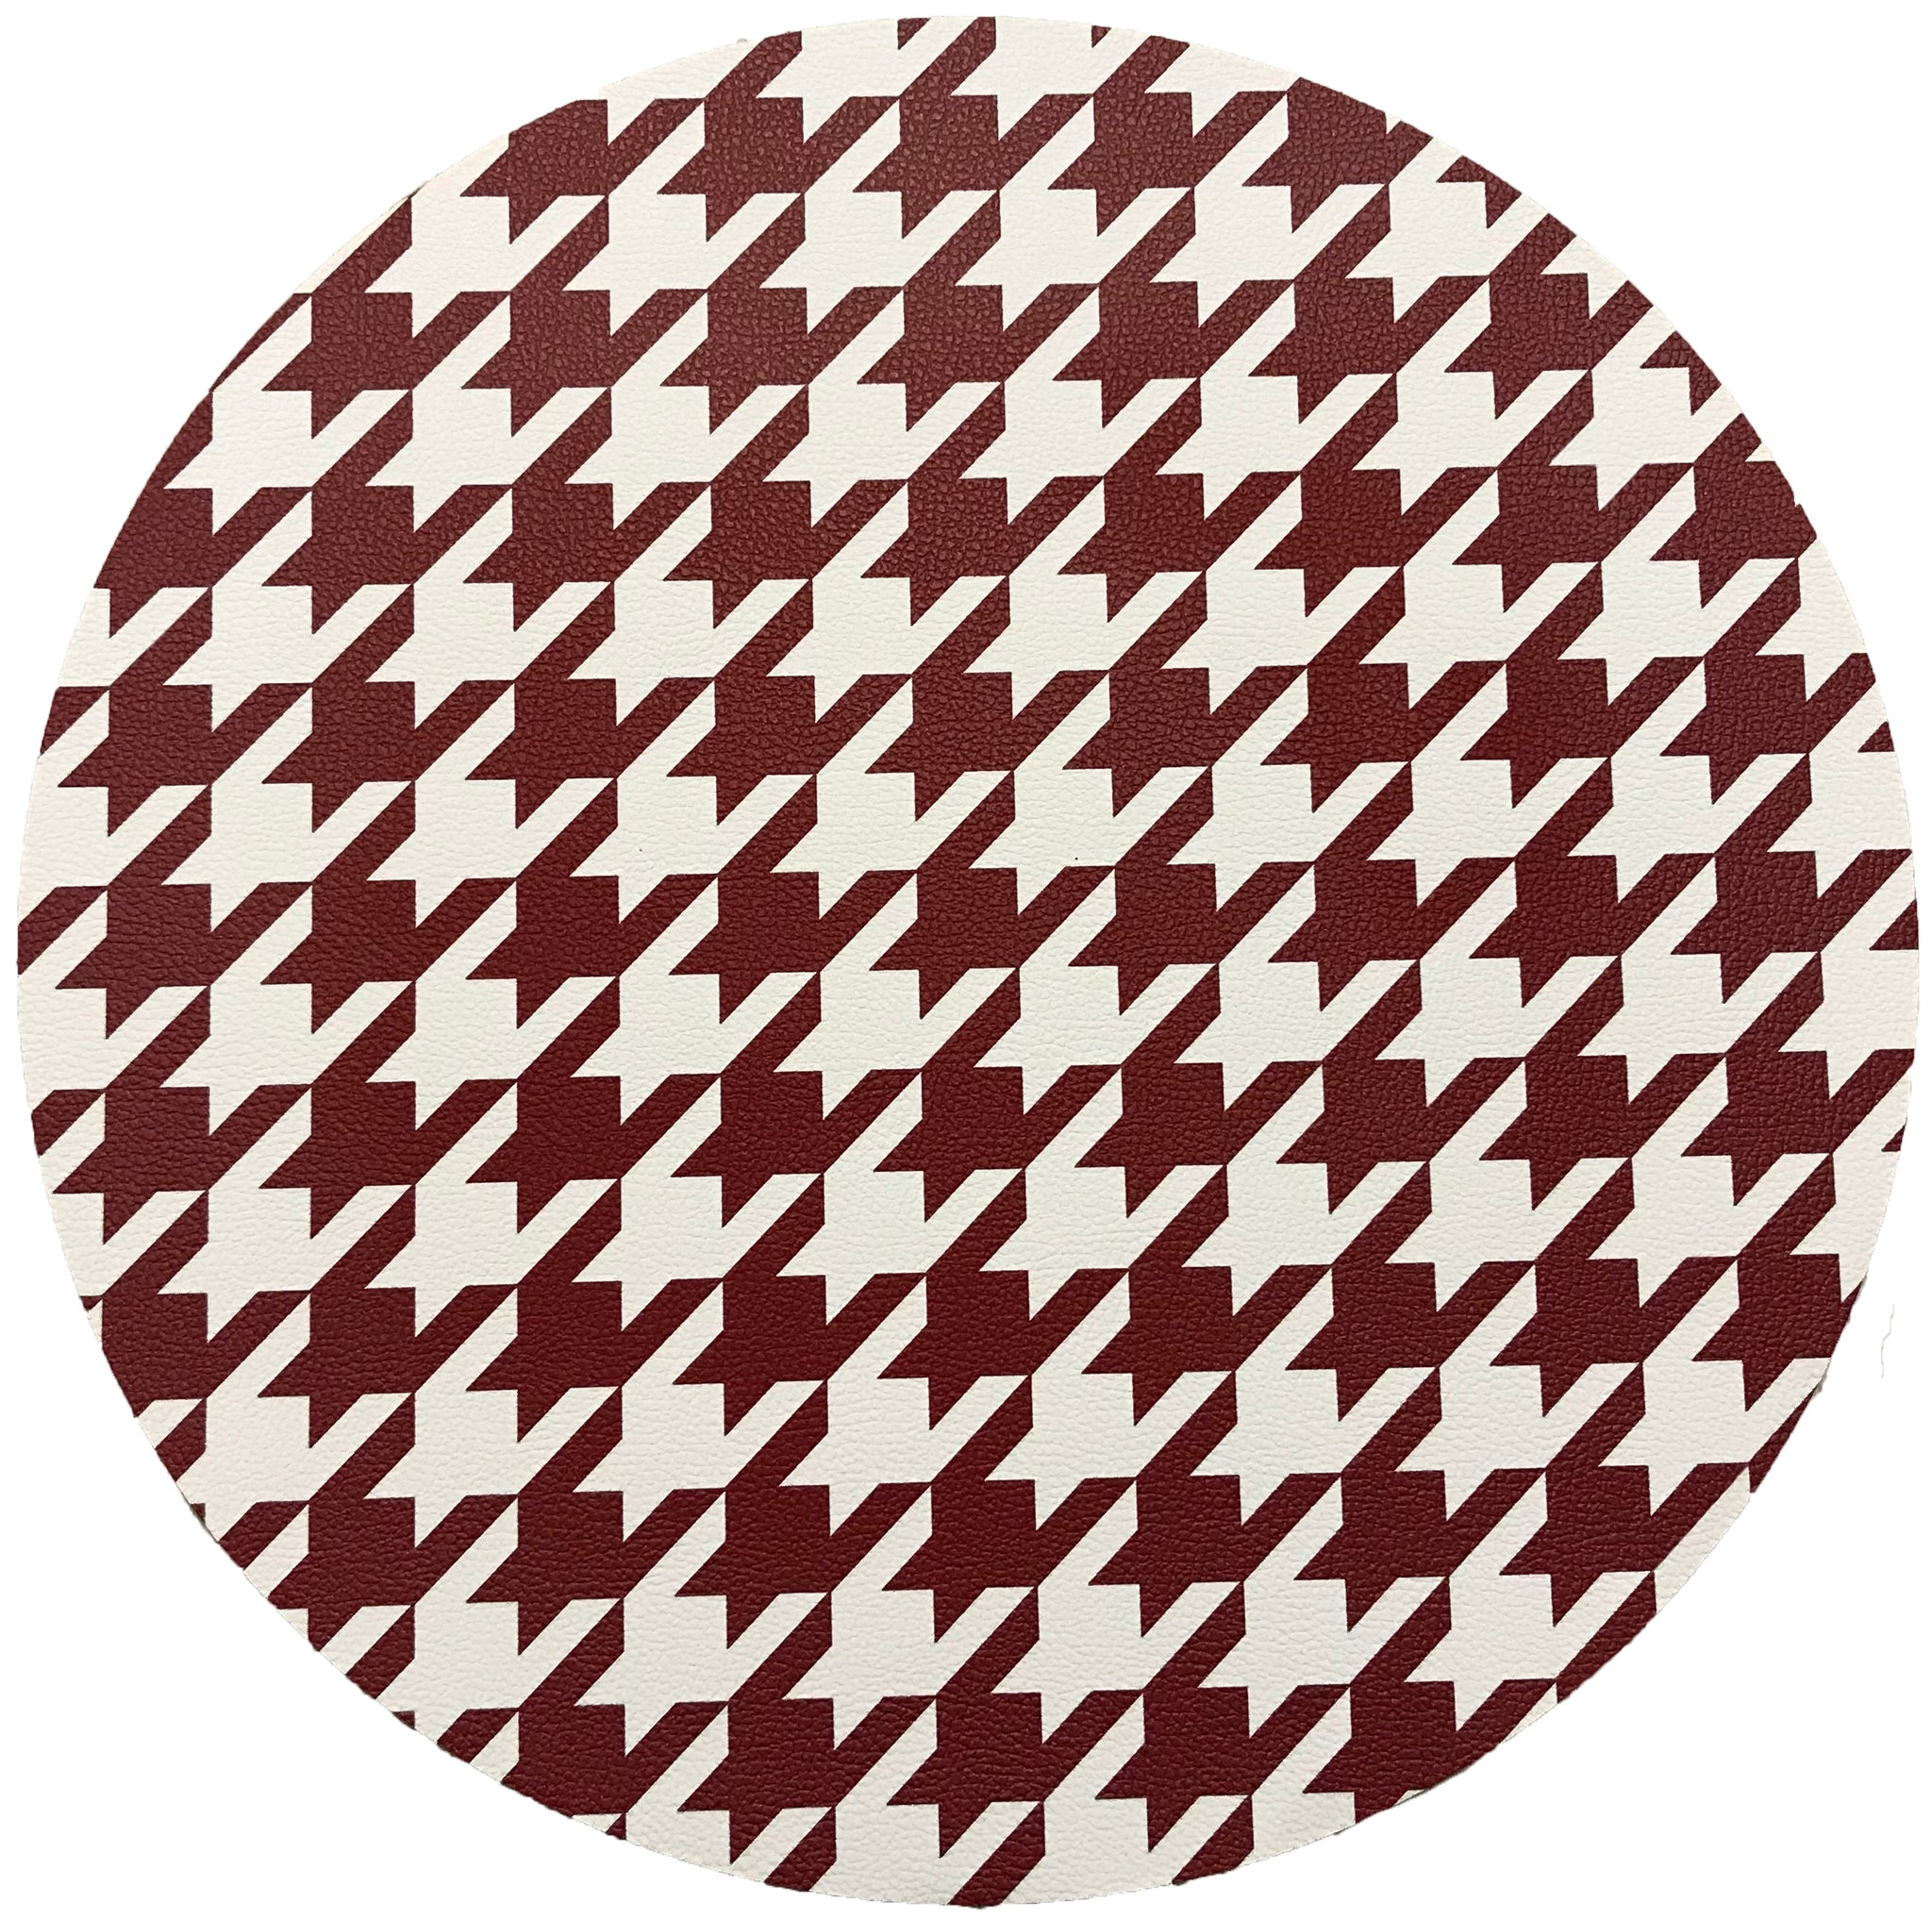 HOUNDSTOOTH RED WHITE 16" ROUND PEBBLE PLACEMAT, SET OF 4 - nicolettemayer.com